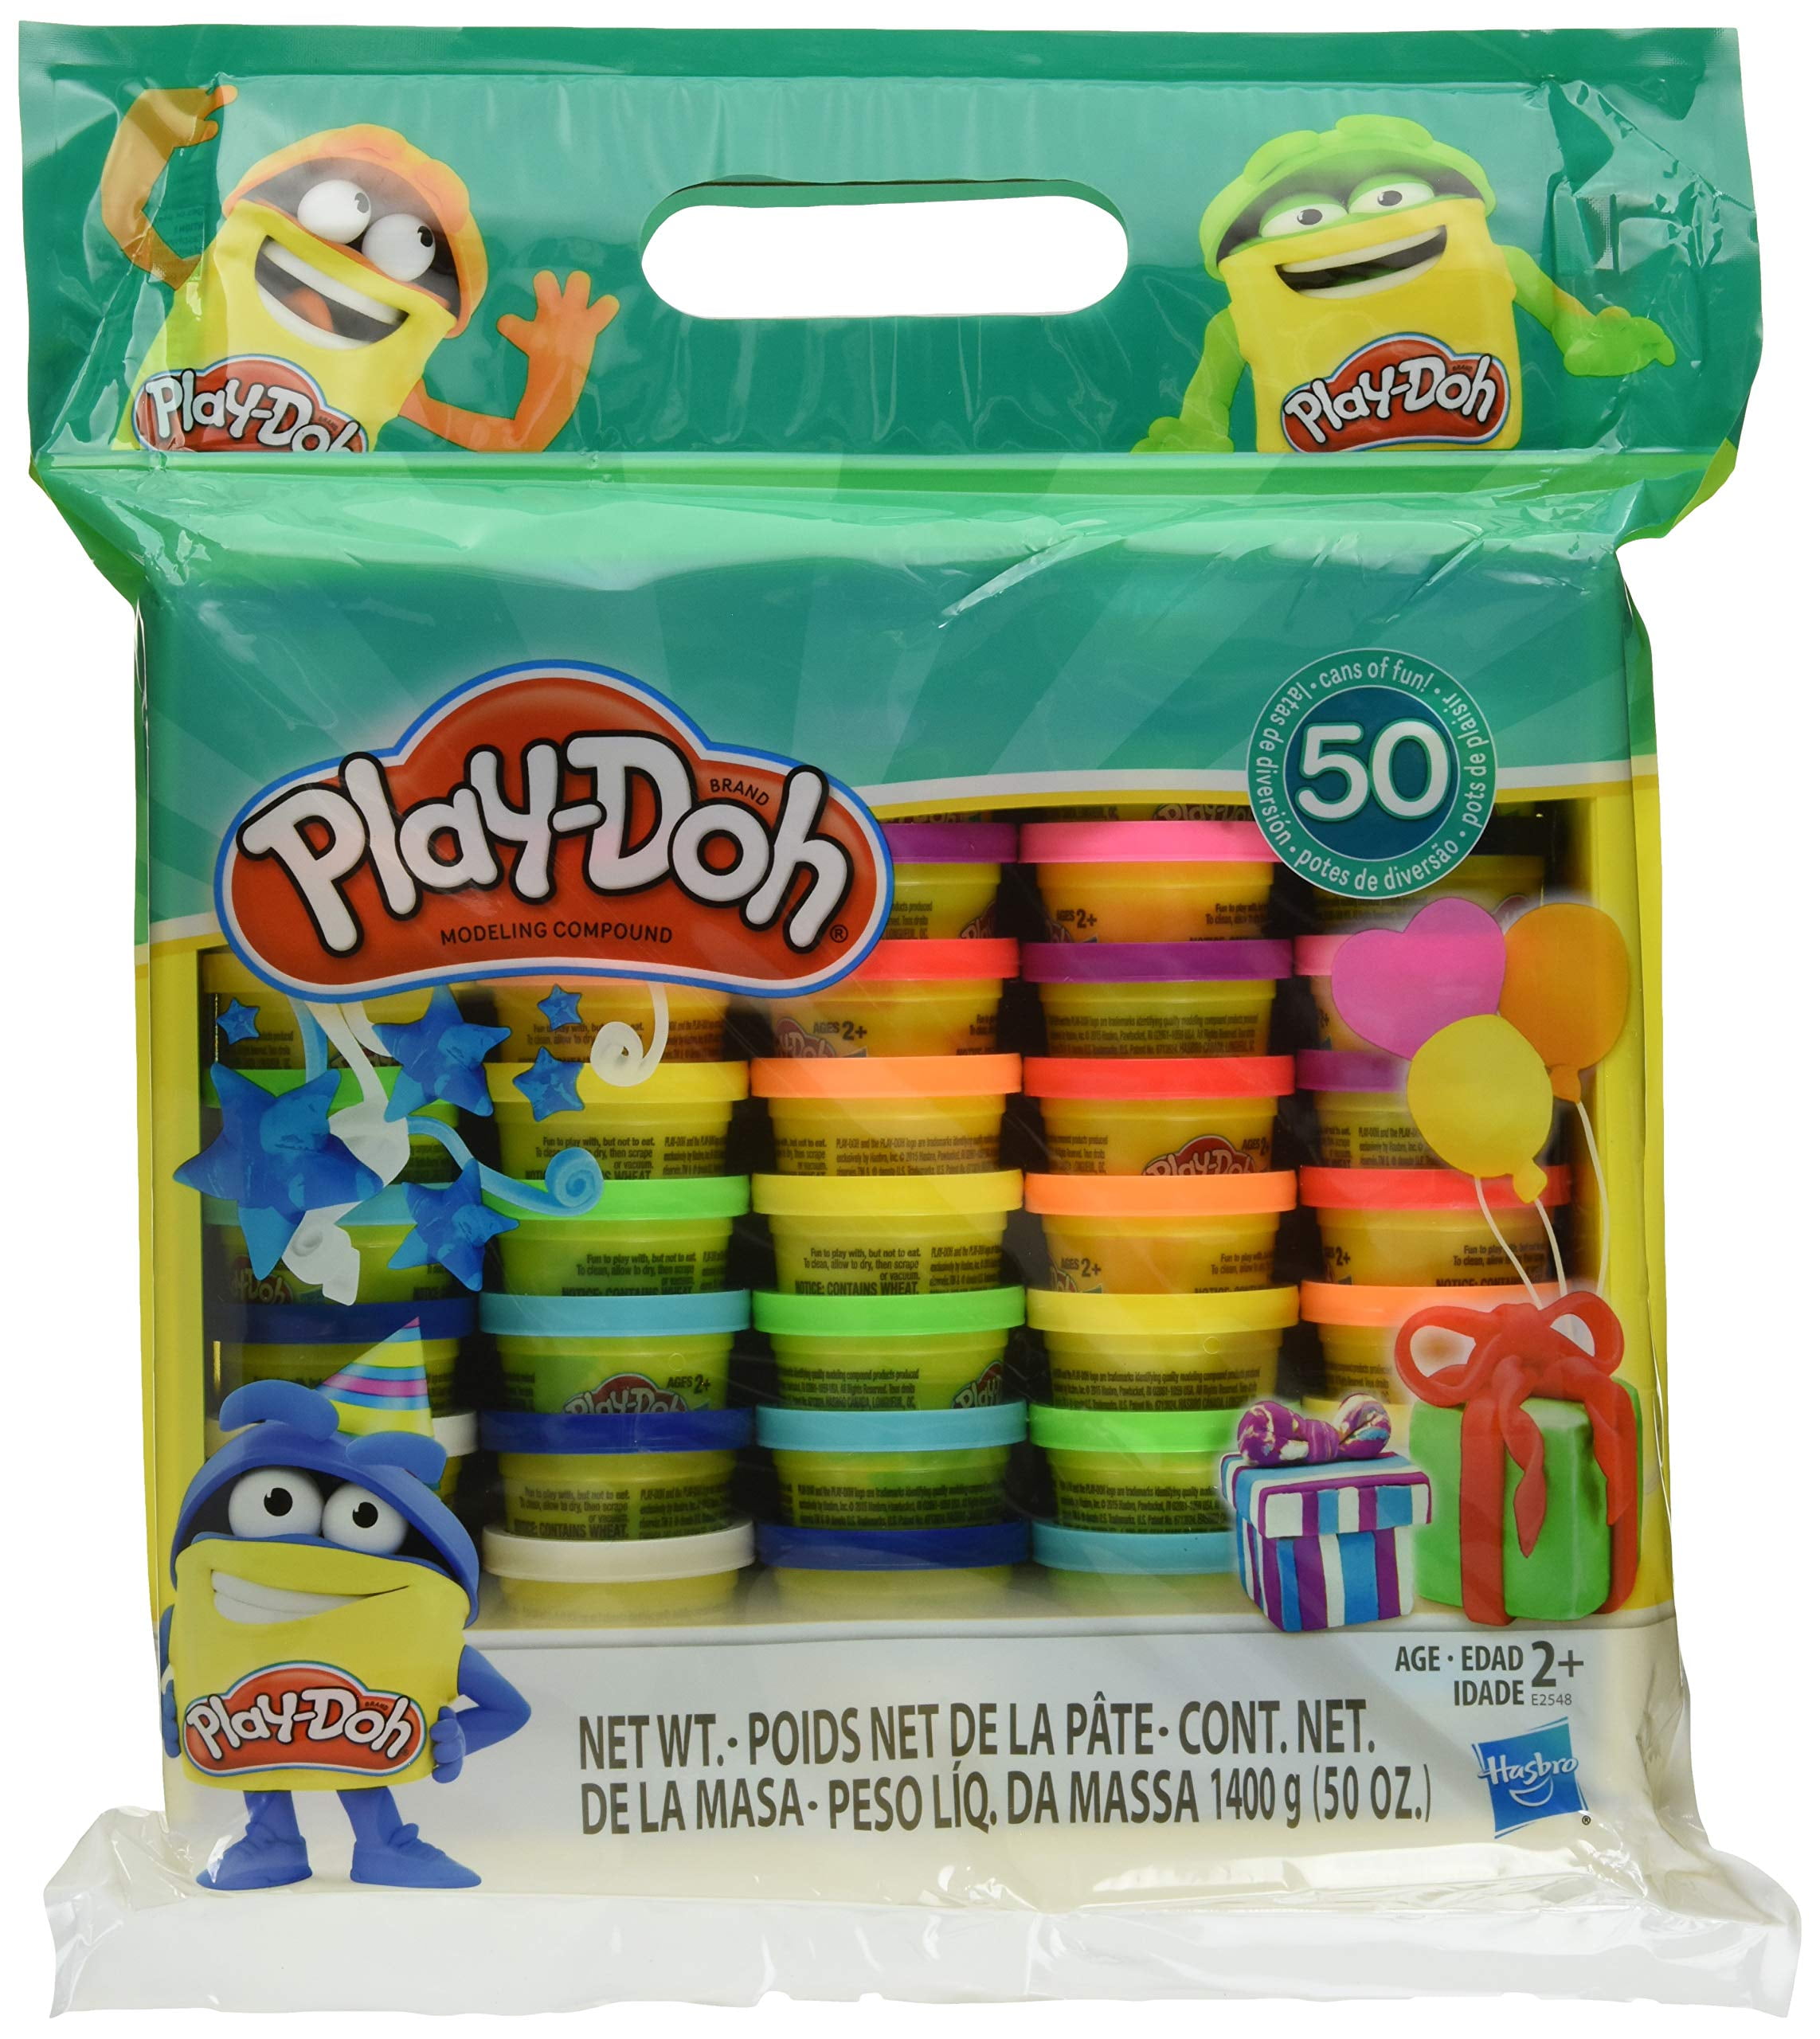 Play-Doh Ultimate Rainbow 40 Pack including Play-Doh Sparkle Compound & 3 Tools 